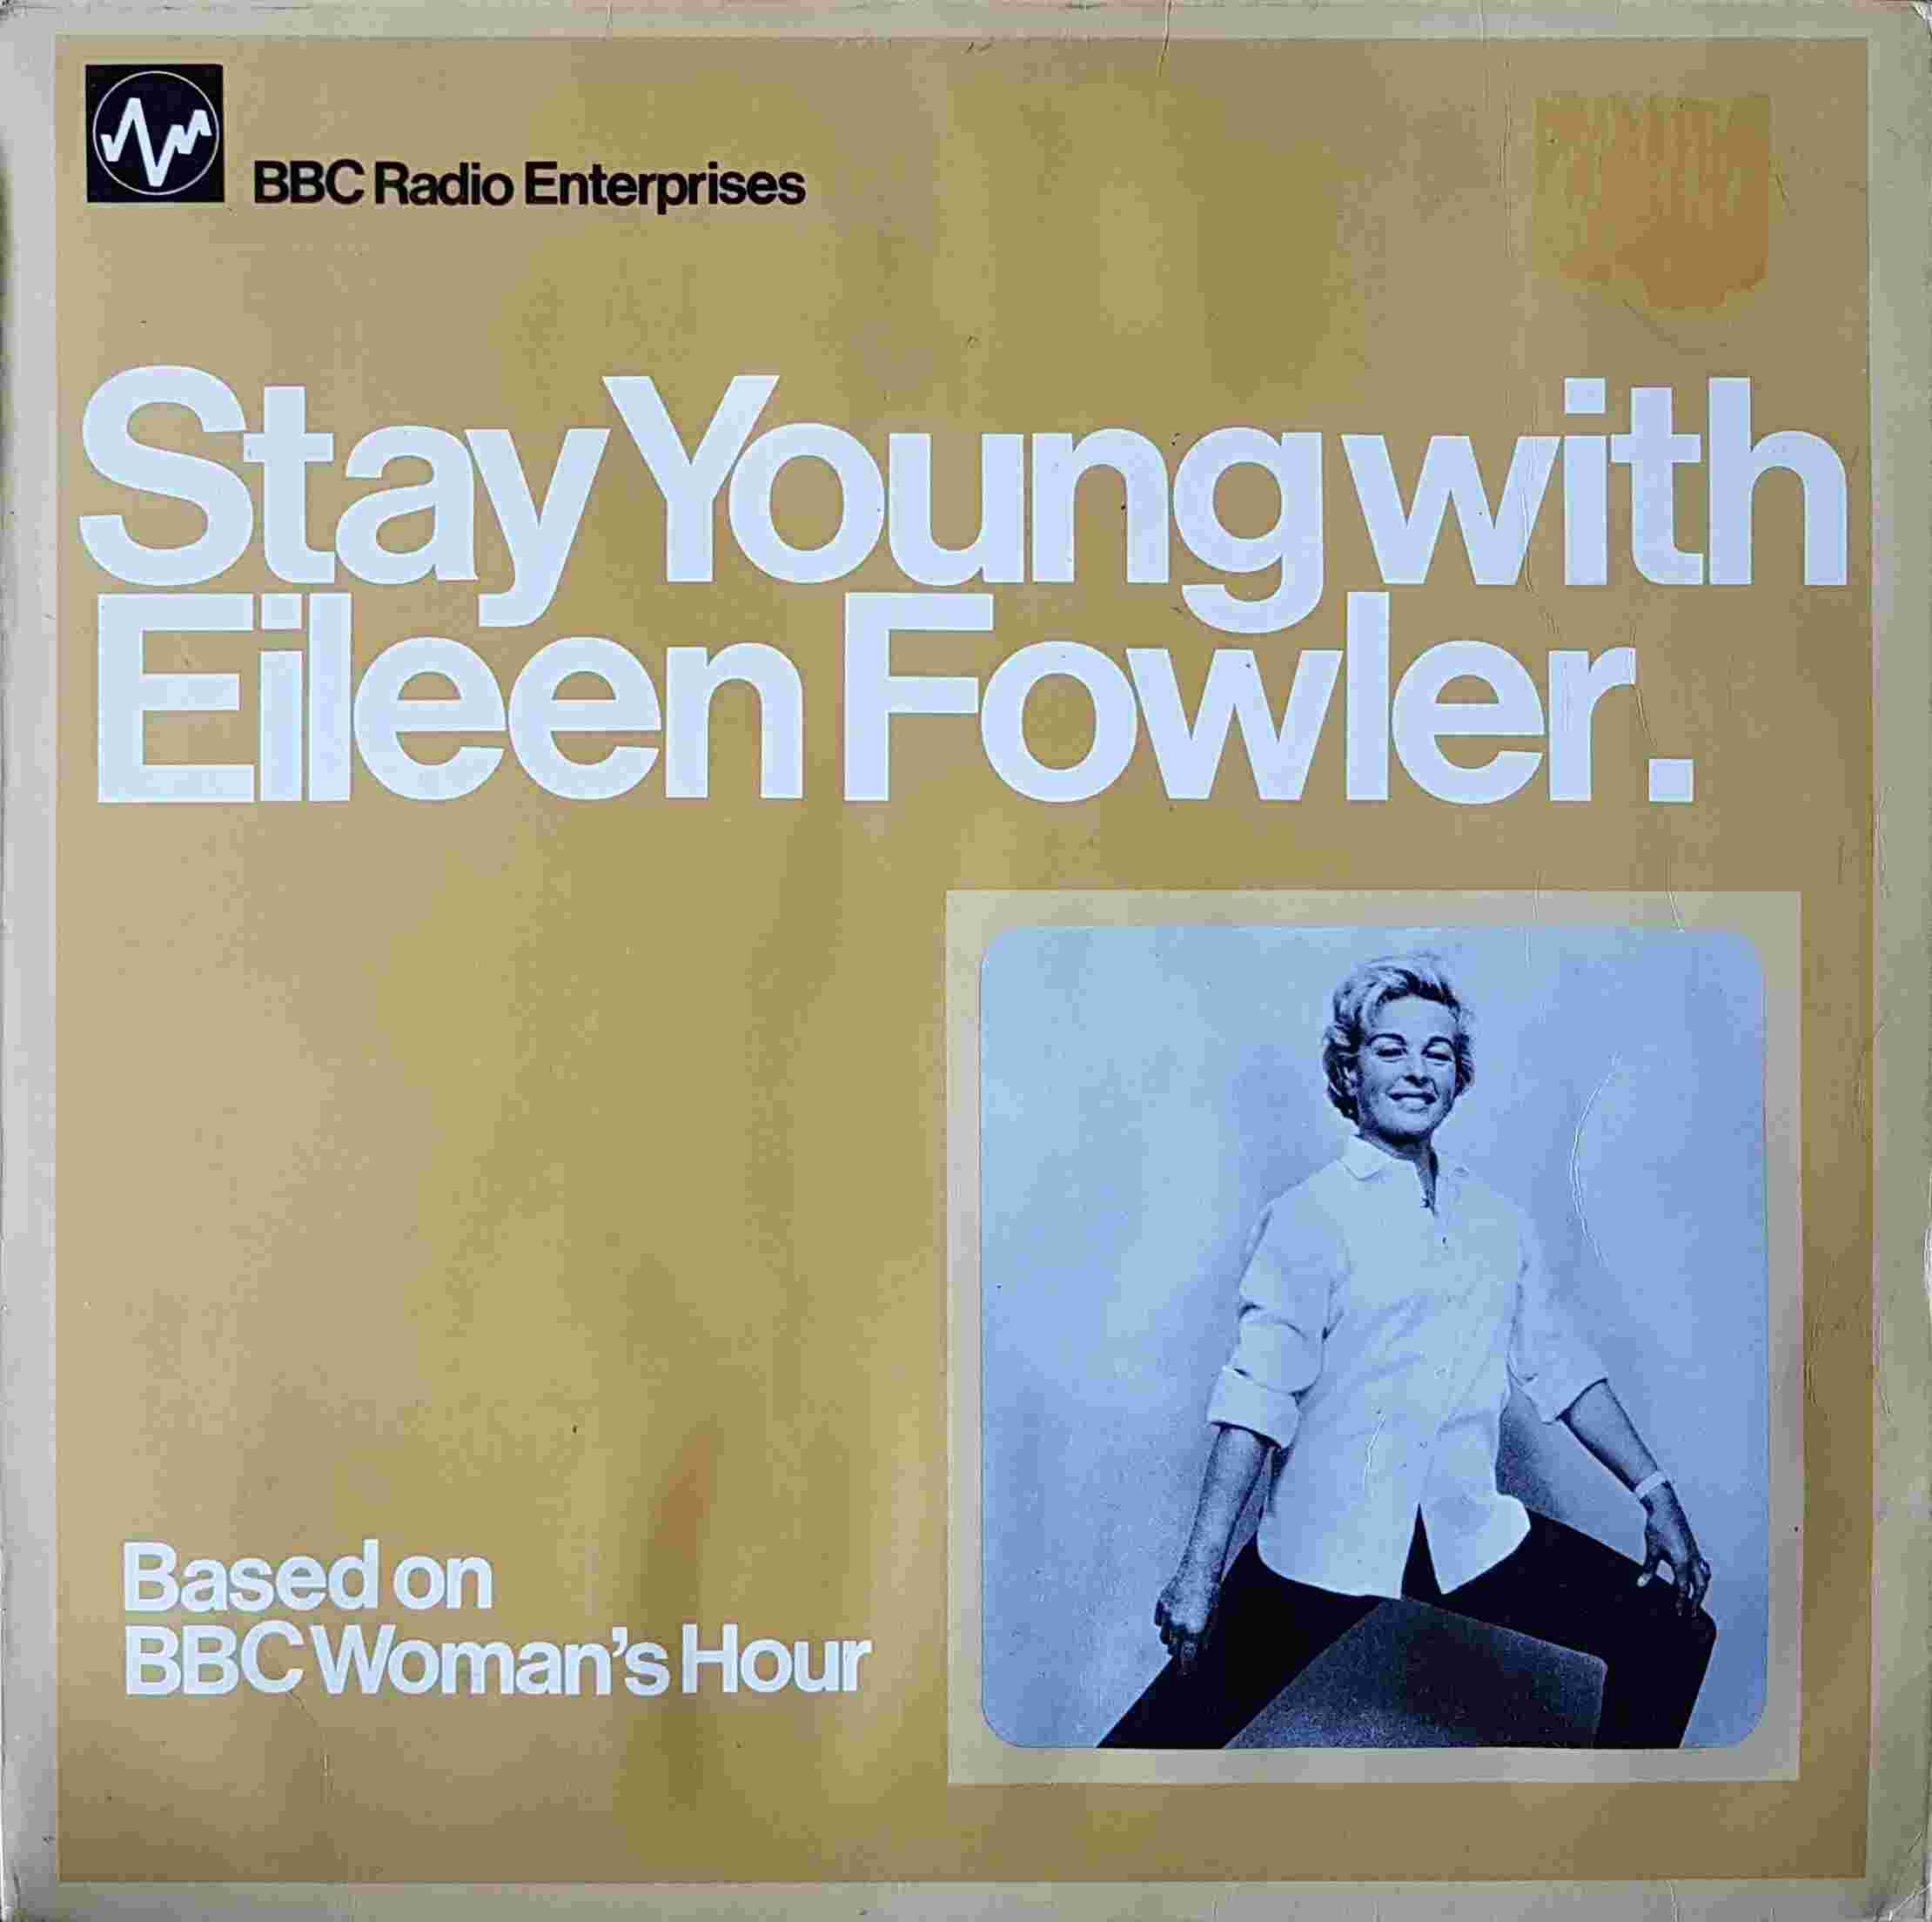 Picture of REC 18 Stay young with Eileen Fowler (Includes exercise programme) by artist Eileen Fowler from the BBC albums - Records and Tapes library